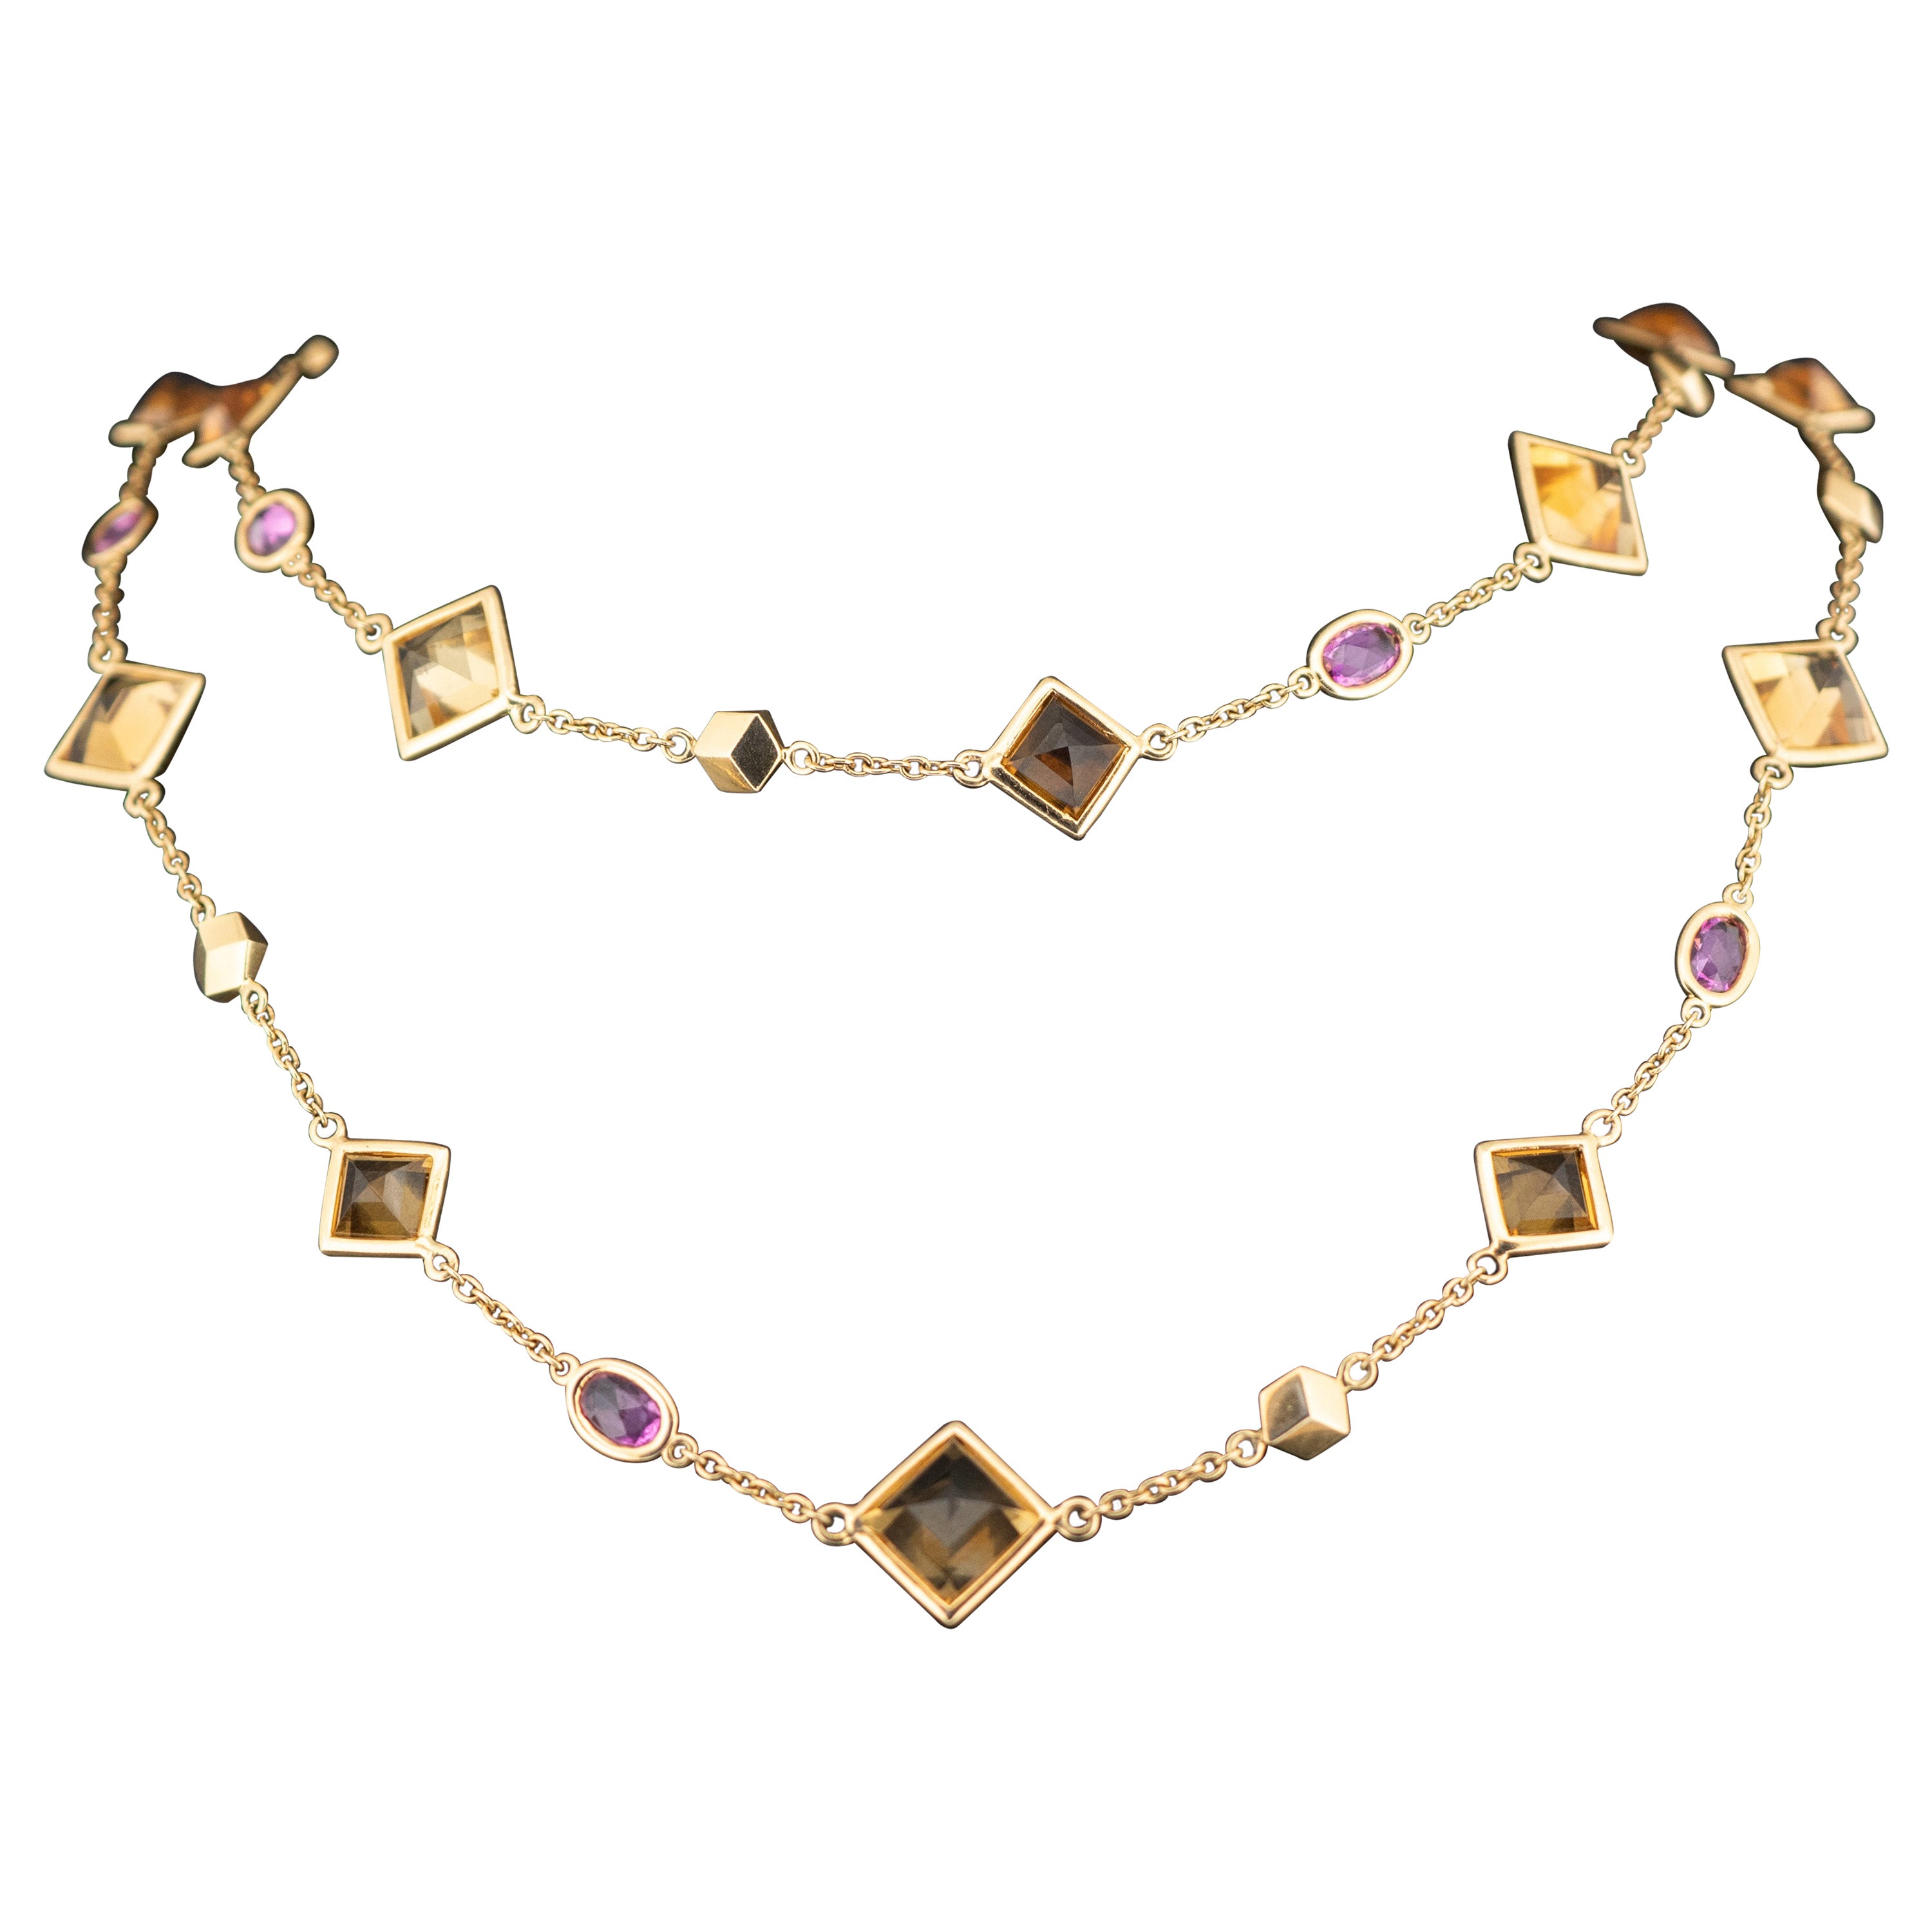 Paolo Costagli 18 Karat Yellow Gold 38.65 Carat Citrine and Sapphire Necklace For Sale